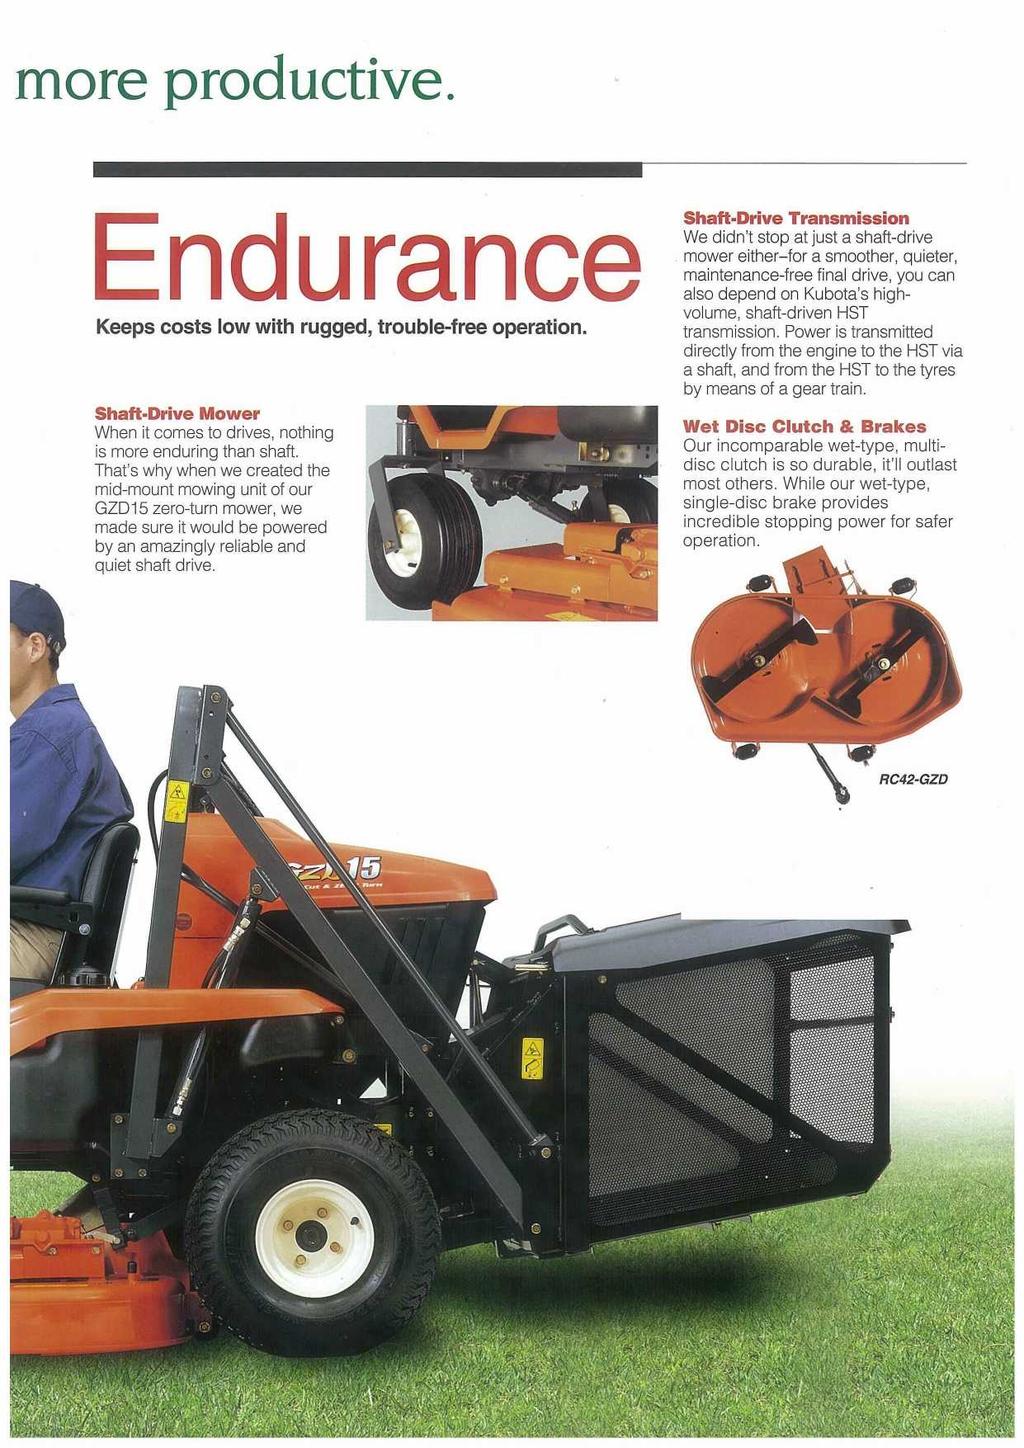 more productive. Endurance Keeps costs low with rugged, trouble-free operation. Shaft-Drive Mower When it comes to drives, nothing is more enduring than shaft.